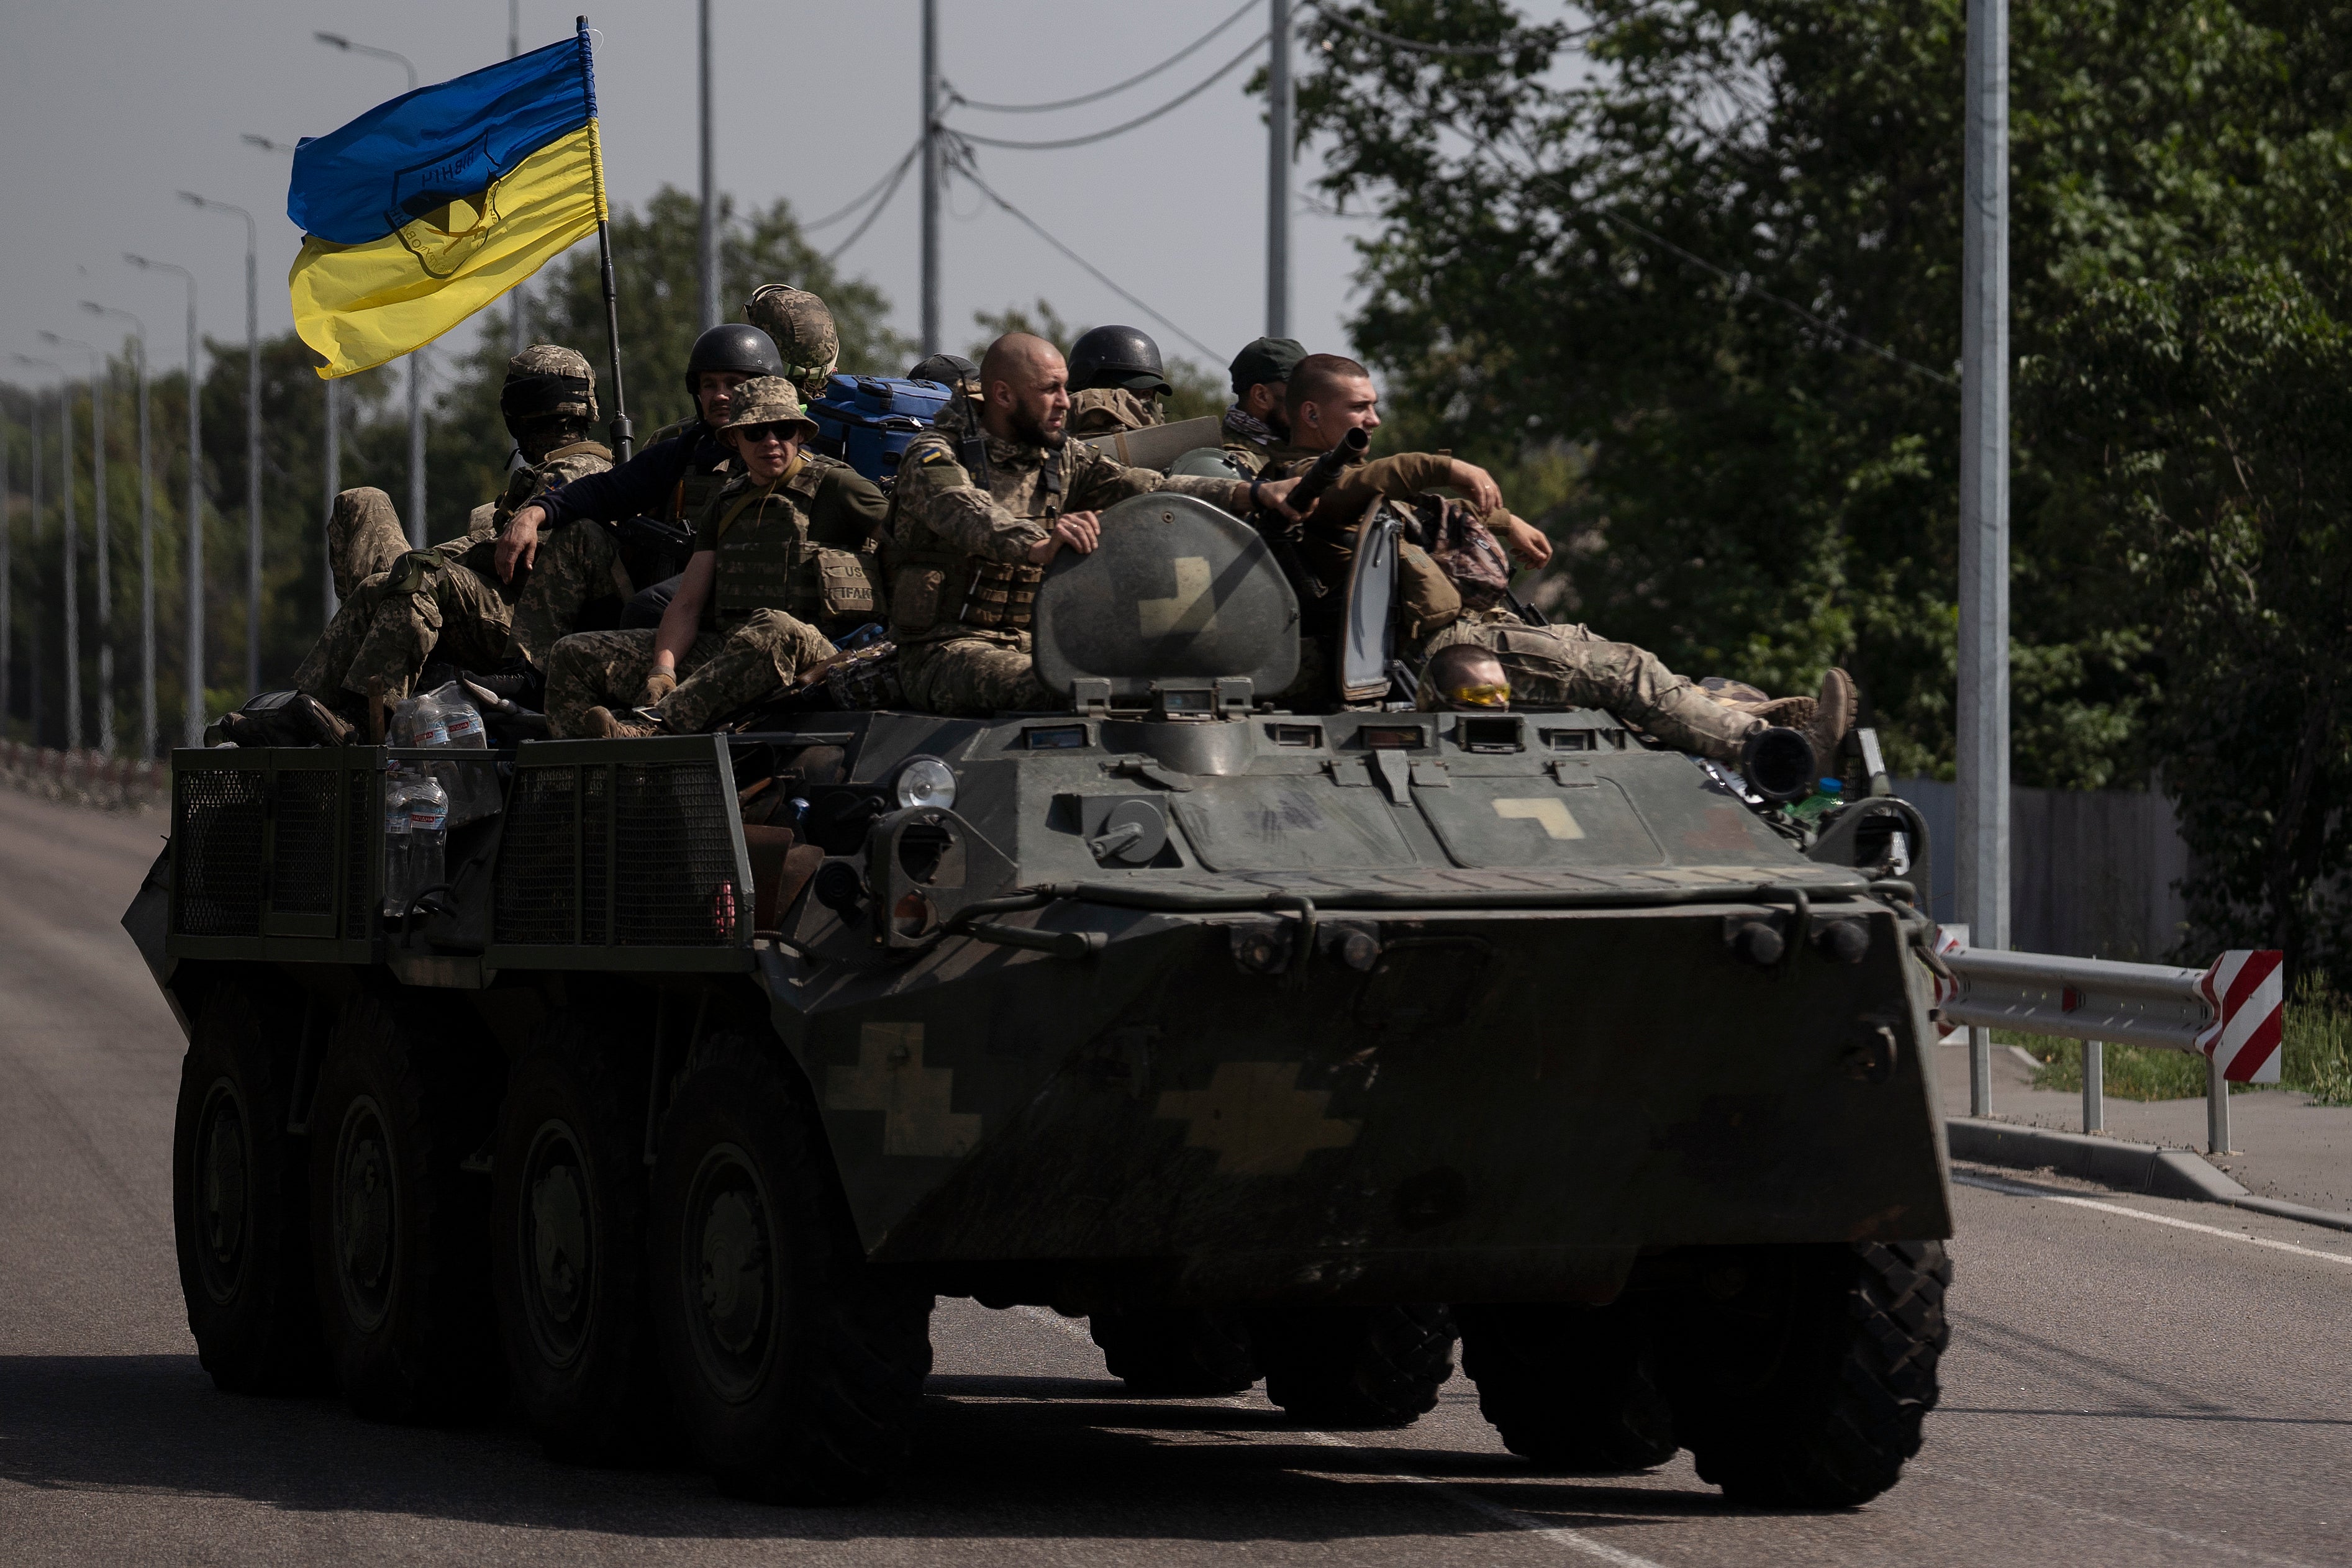 Ukraine’s attack in the Kharkiv region came as a surprise for Moscow